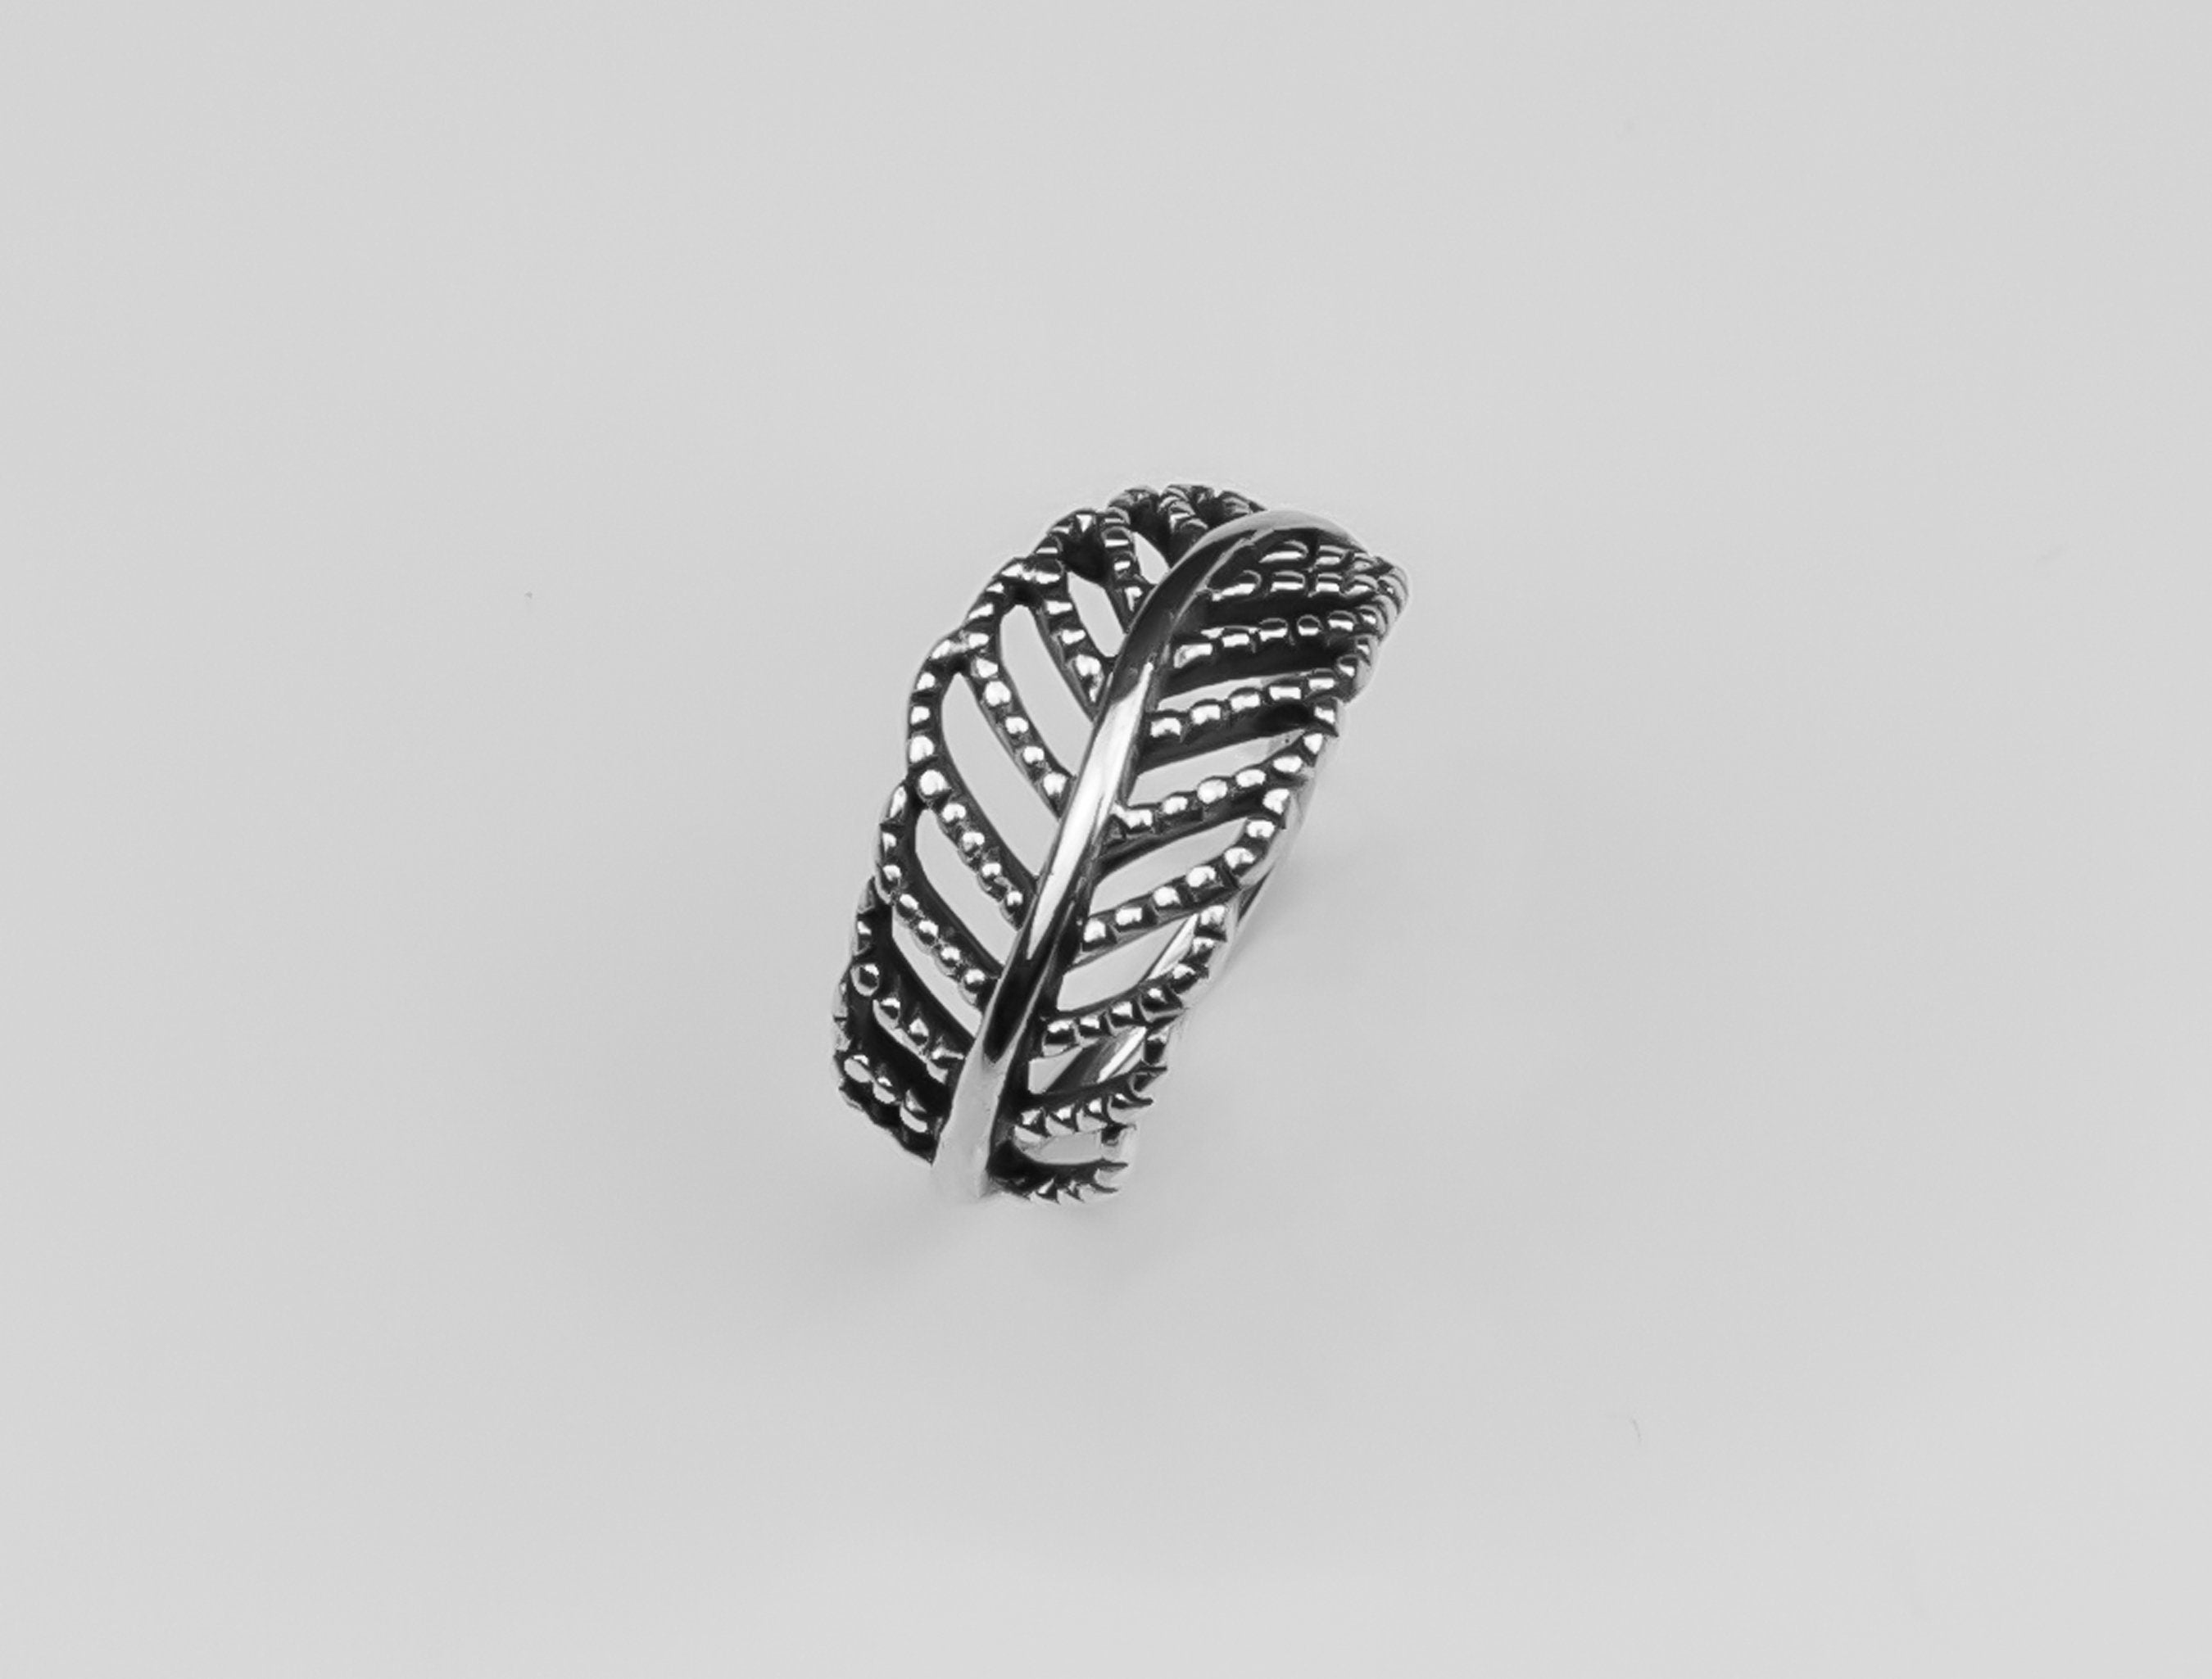 Leaf Pattern Silver 925 Ring, Boho Silver Ring, Adjustable Silver Ring, Best Gift for Women, Sterling Silver Ring, Silver Chance Ring